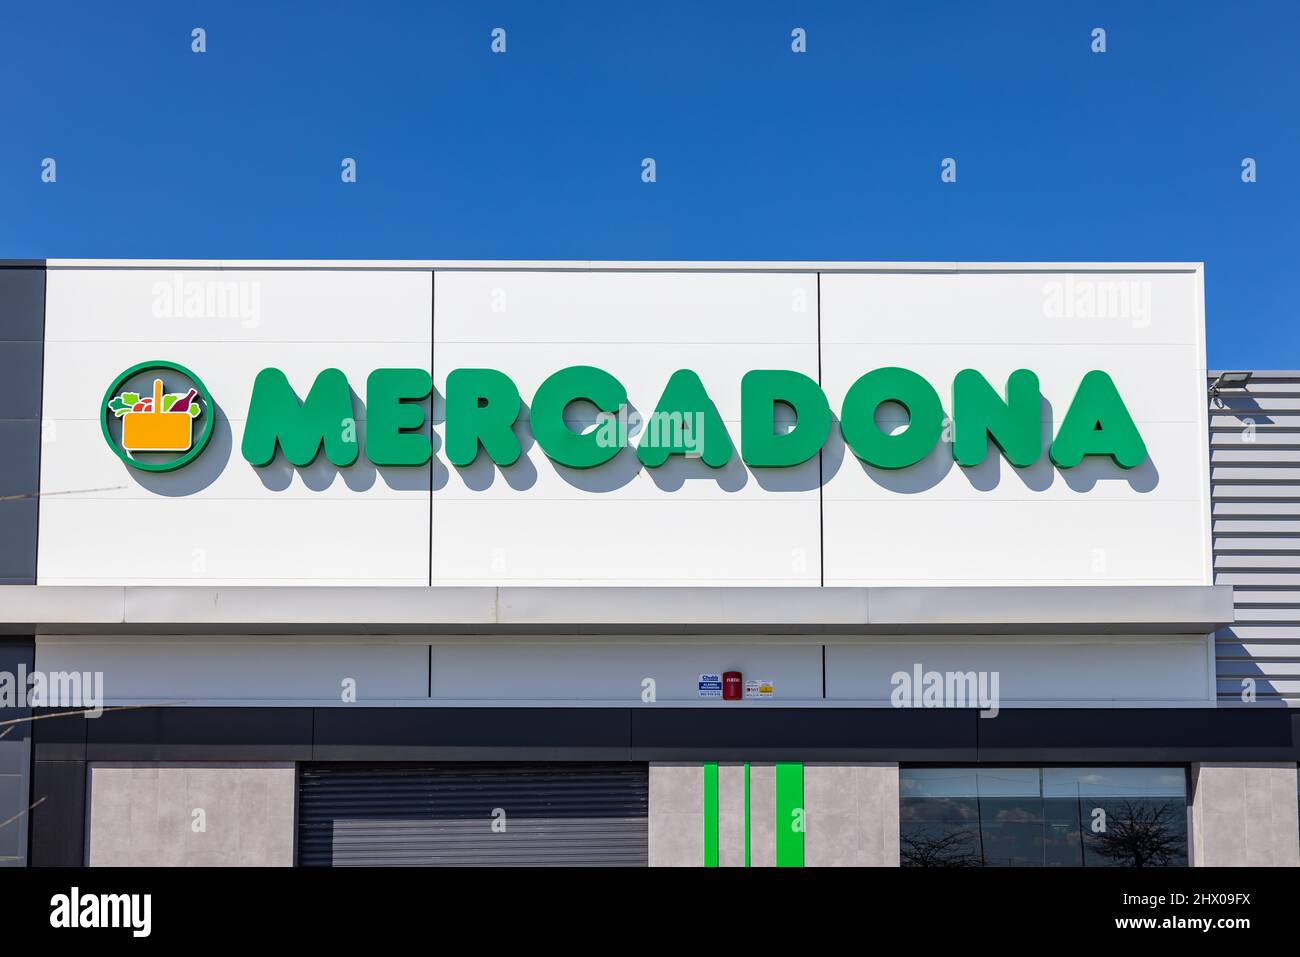 Huelva, Spain - March 6, 2022: View of a Mercadona store. Mercadona is a Spanish family-owned supermarket chain founded in Valencia. It was the first Stock Photo